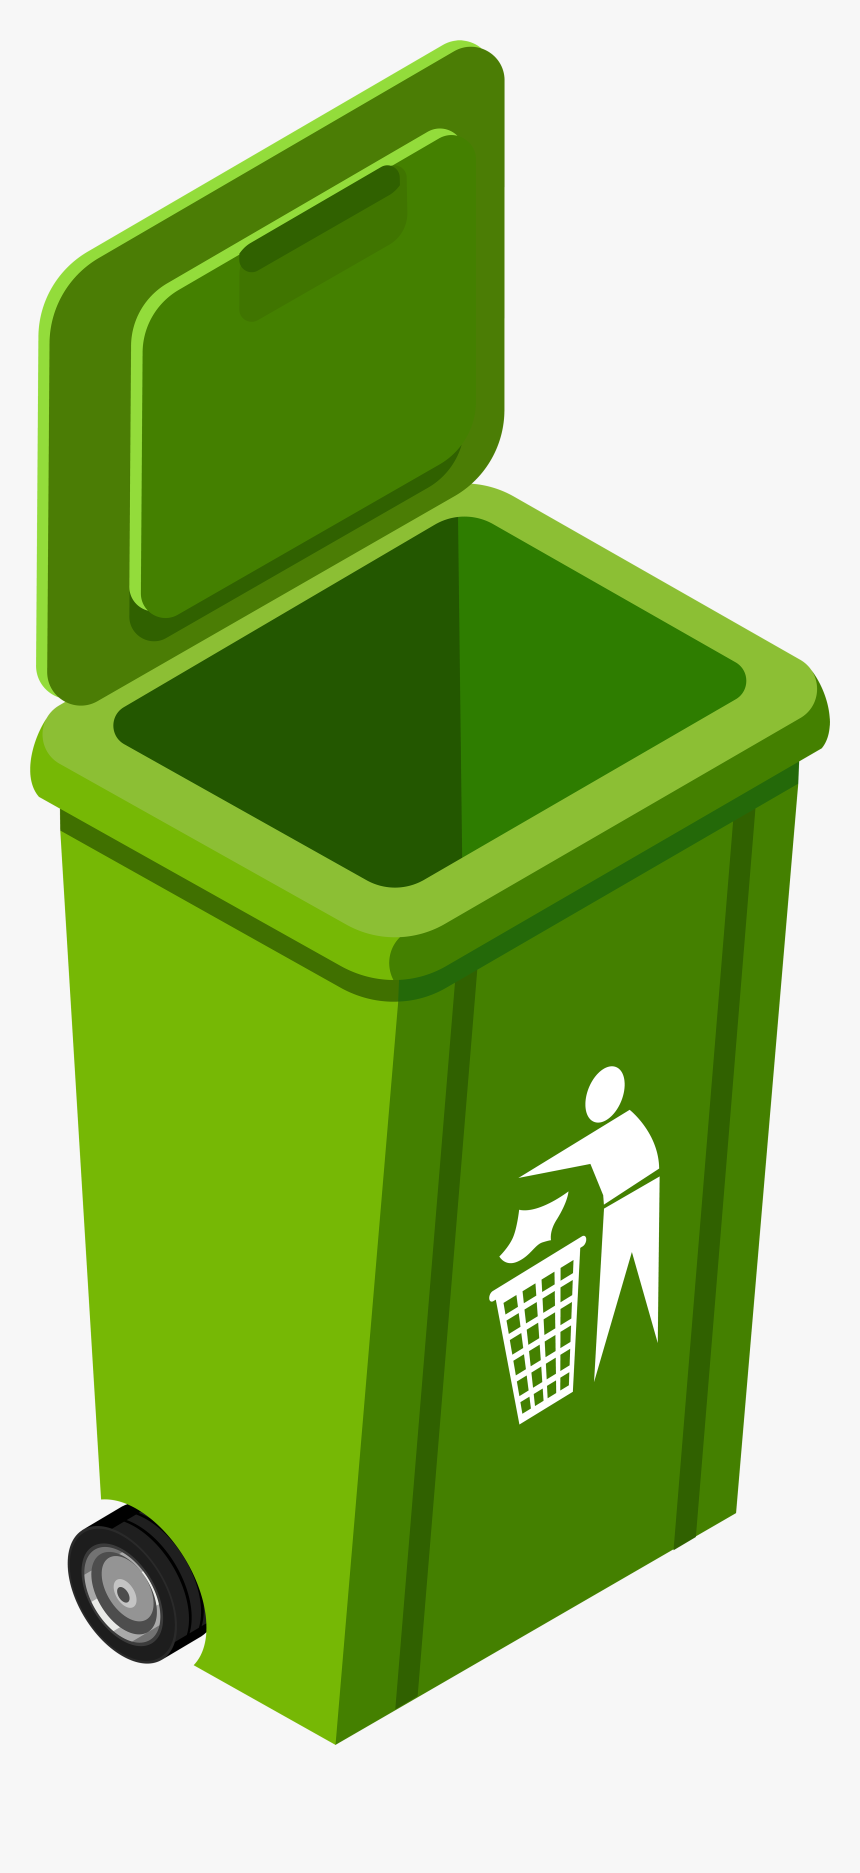 Trash Bin with Recycle Symbol PNG Clip Art - Best WEB Clipart - Clip ...